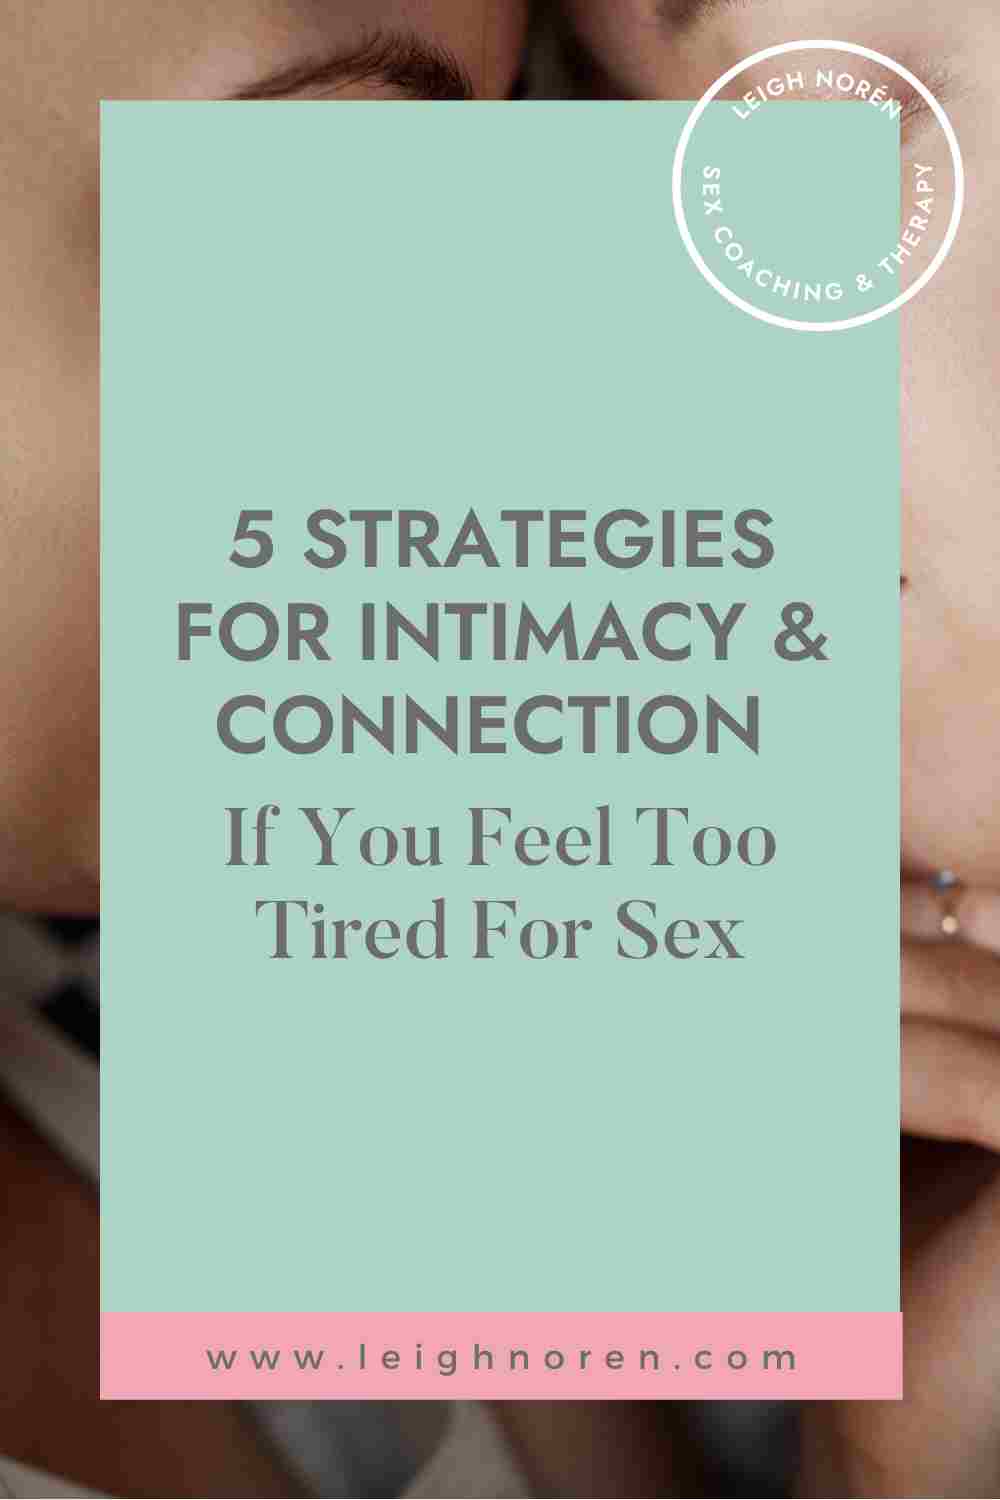 5 Strategies For Intimacy & Connection If You Feel Too Tired For Sex